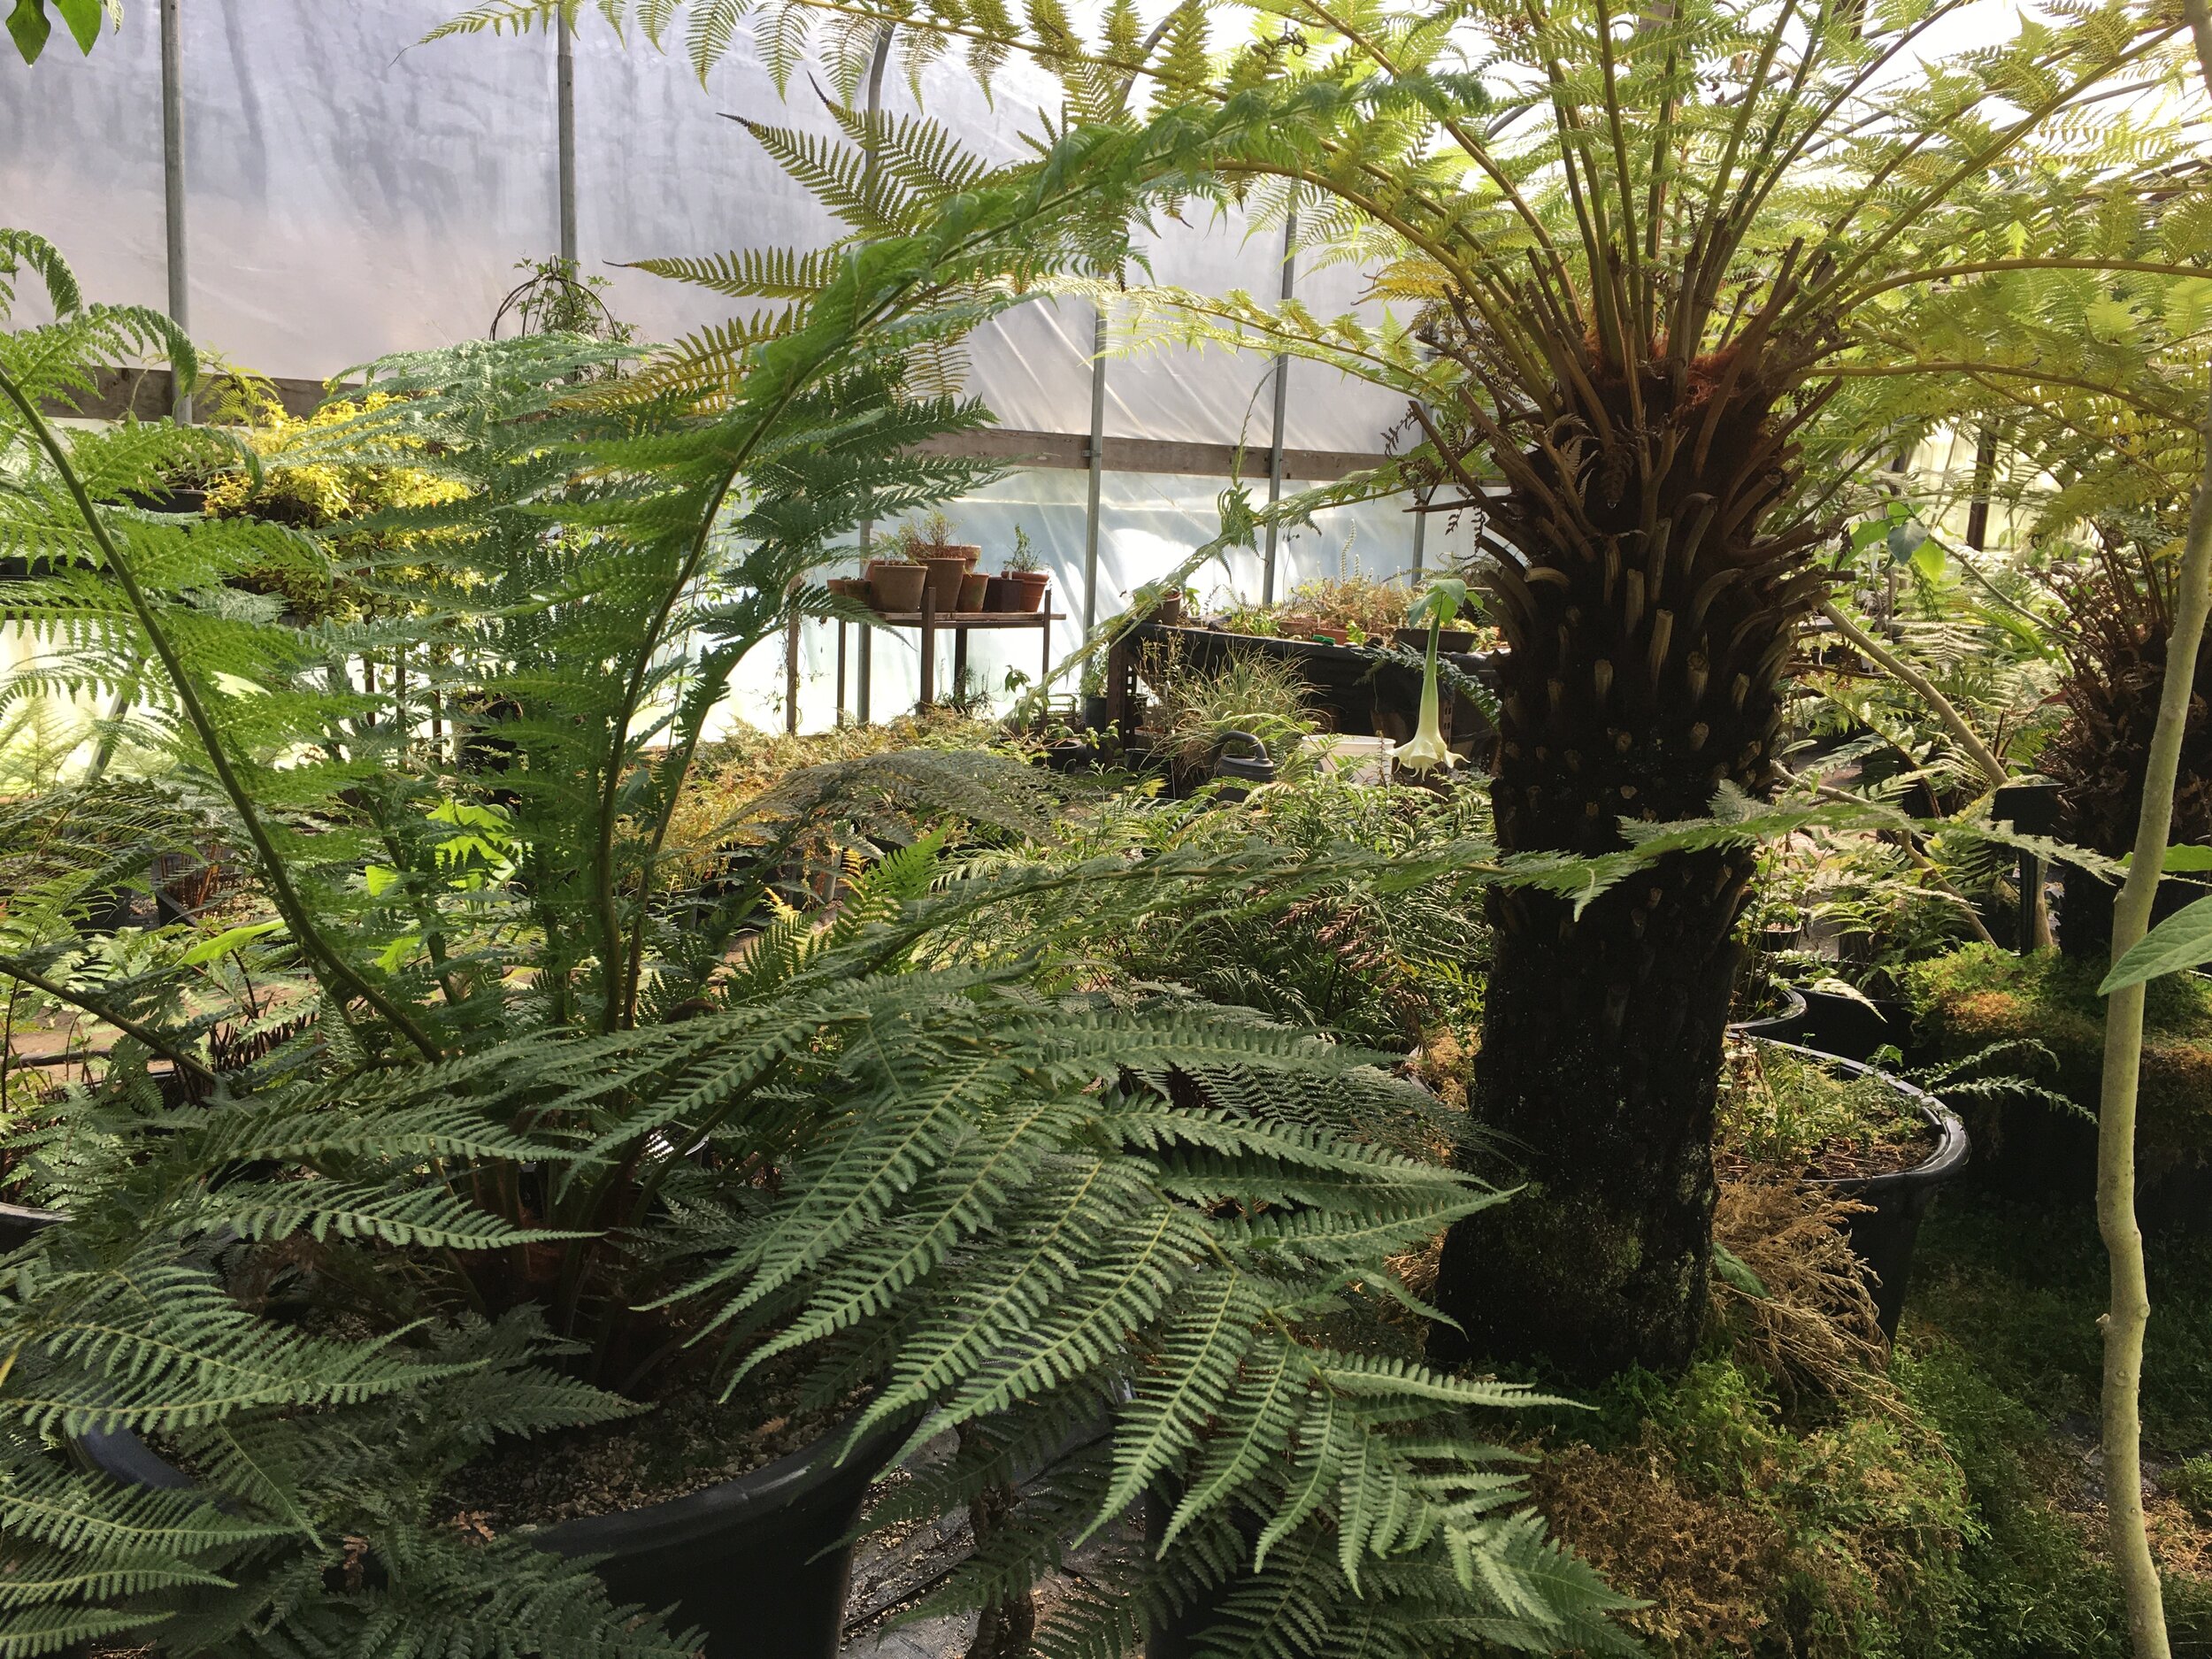 Dickonsia Antarctica Tree Fern with 15cm Trunk